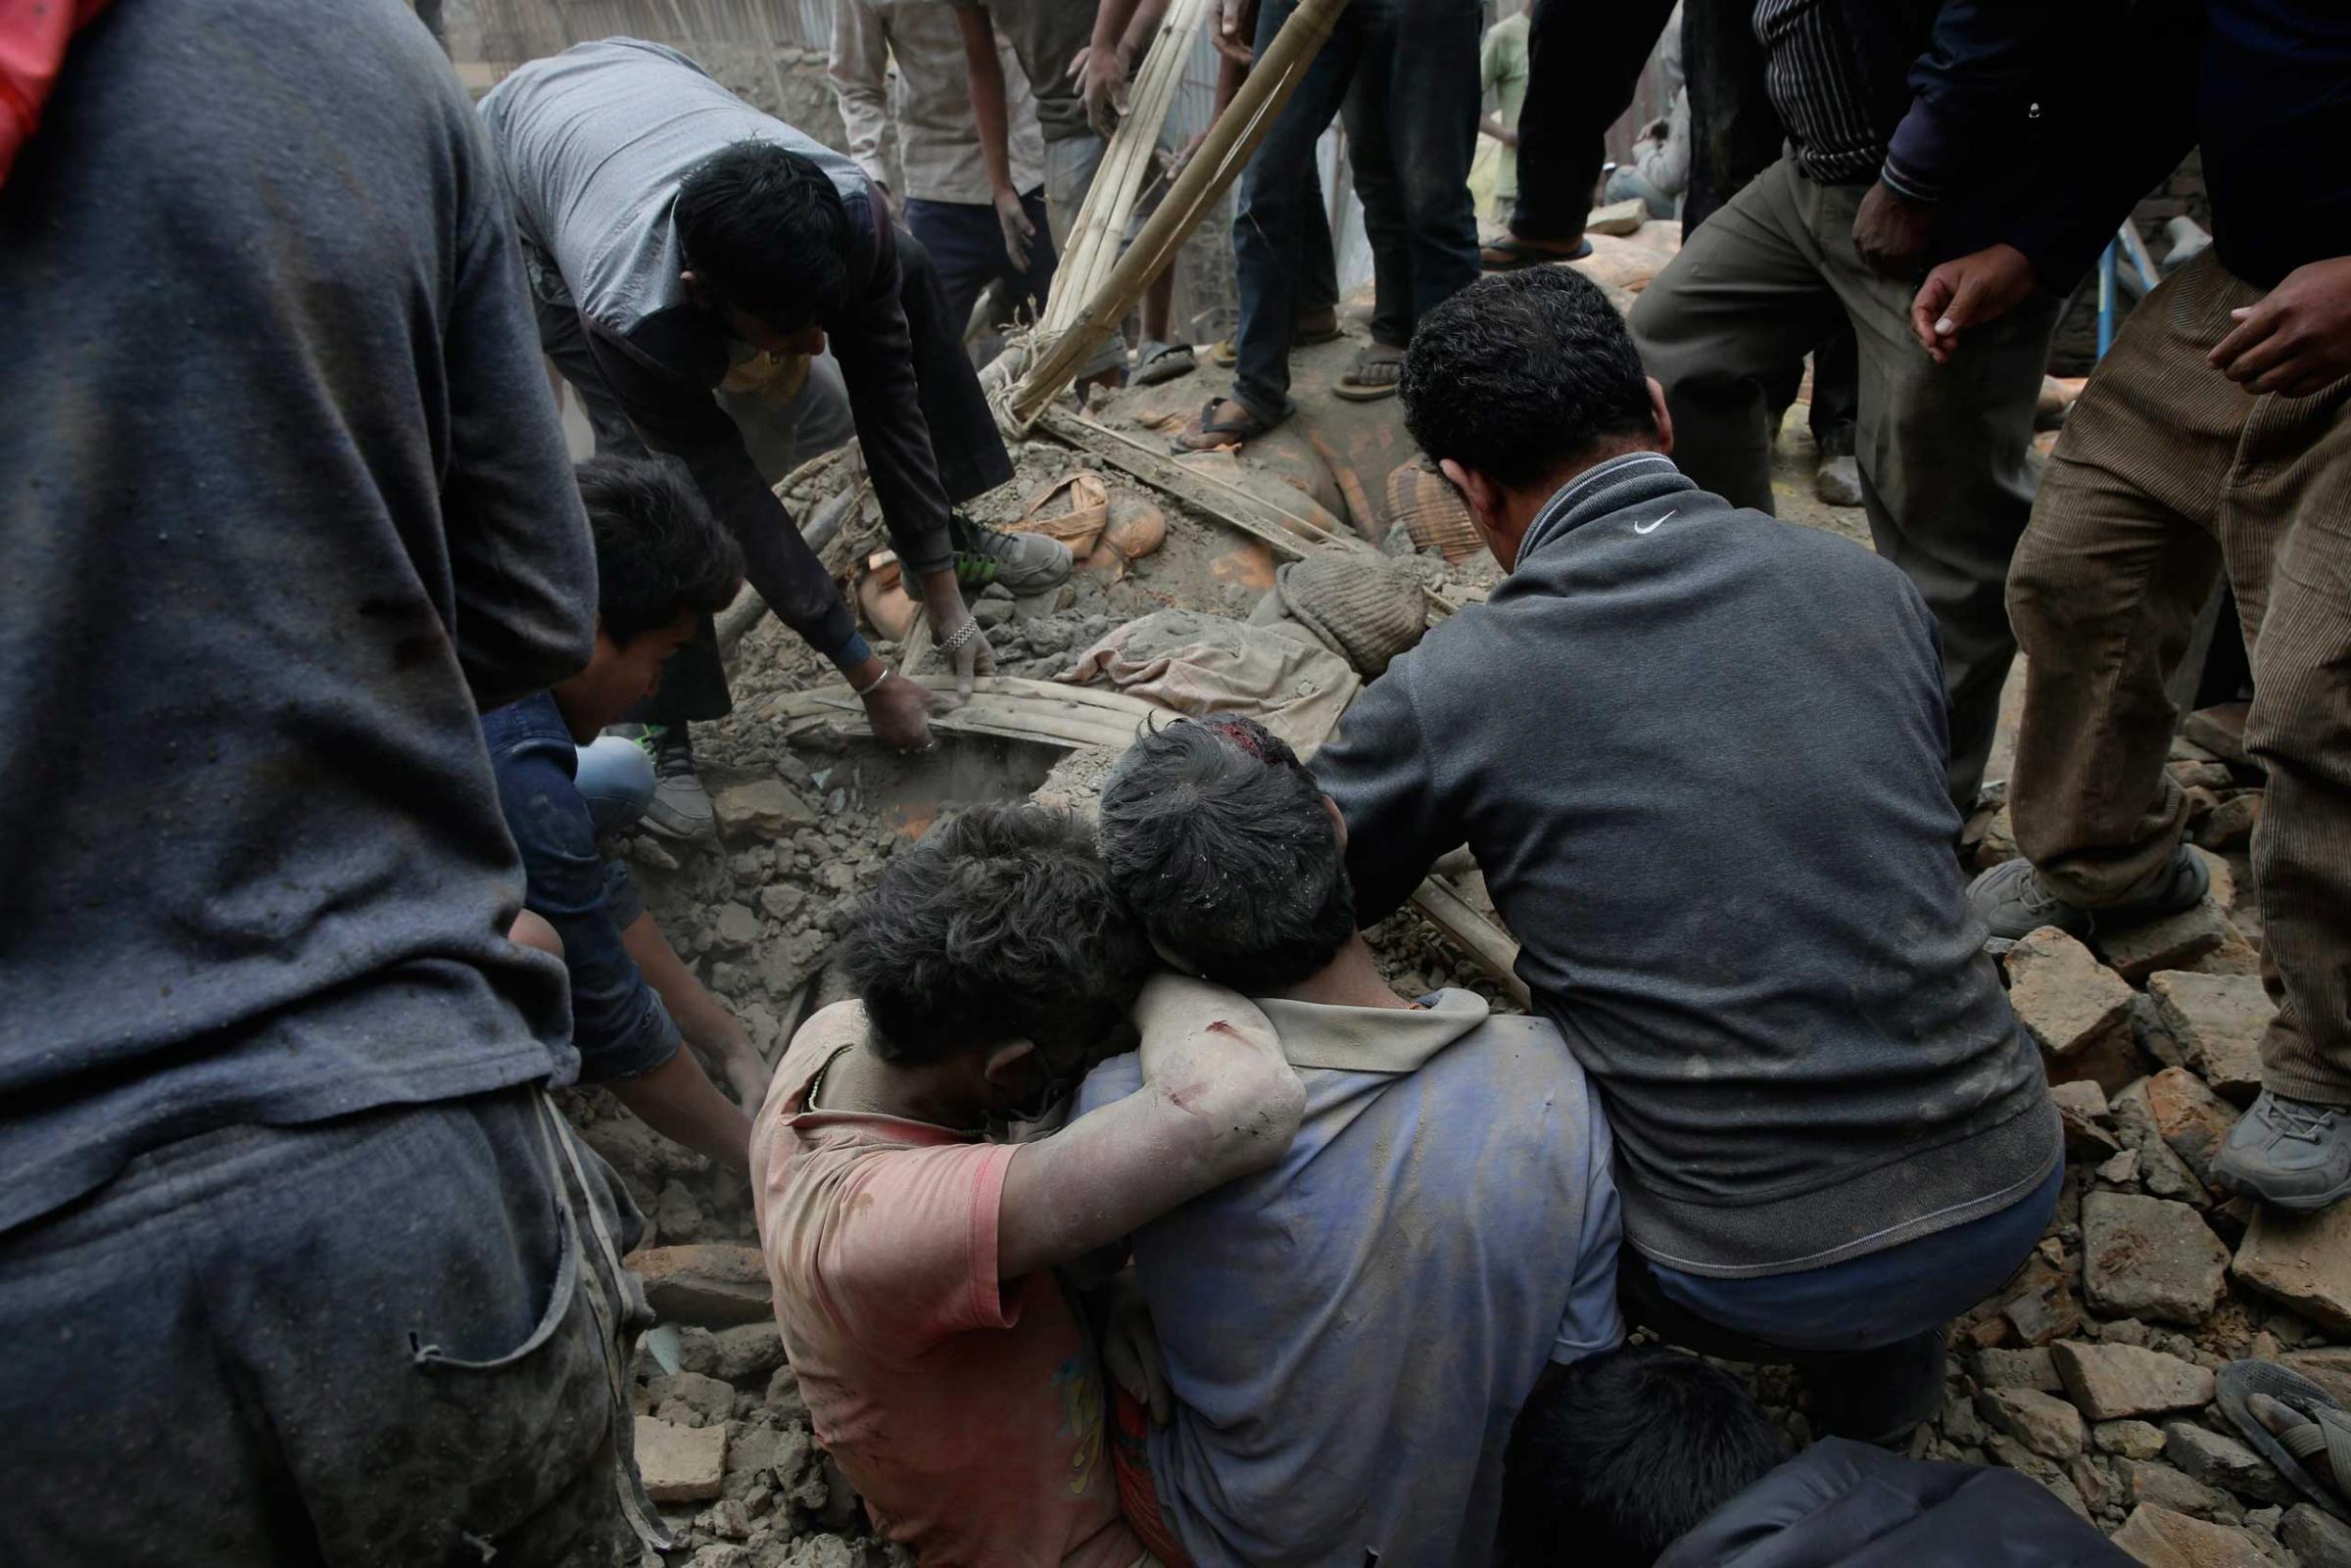 People try to dig out bodies from under the rubble of a destroyed building after an earthquake in Kathmandu, Nepal on April 25, 2015.